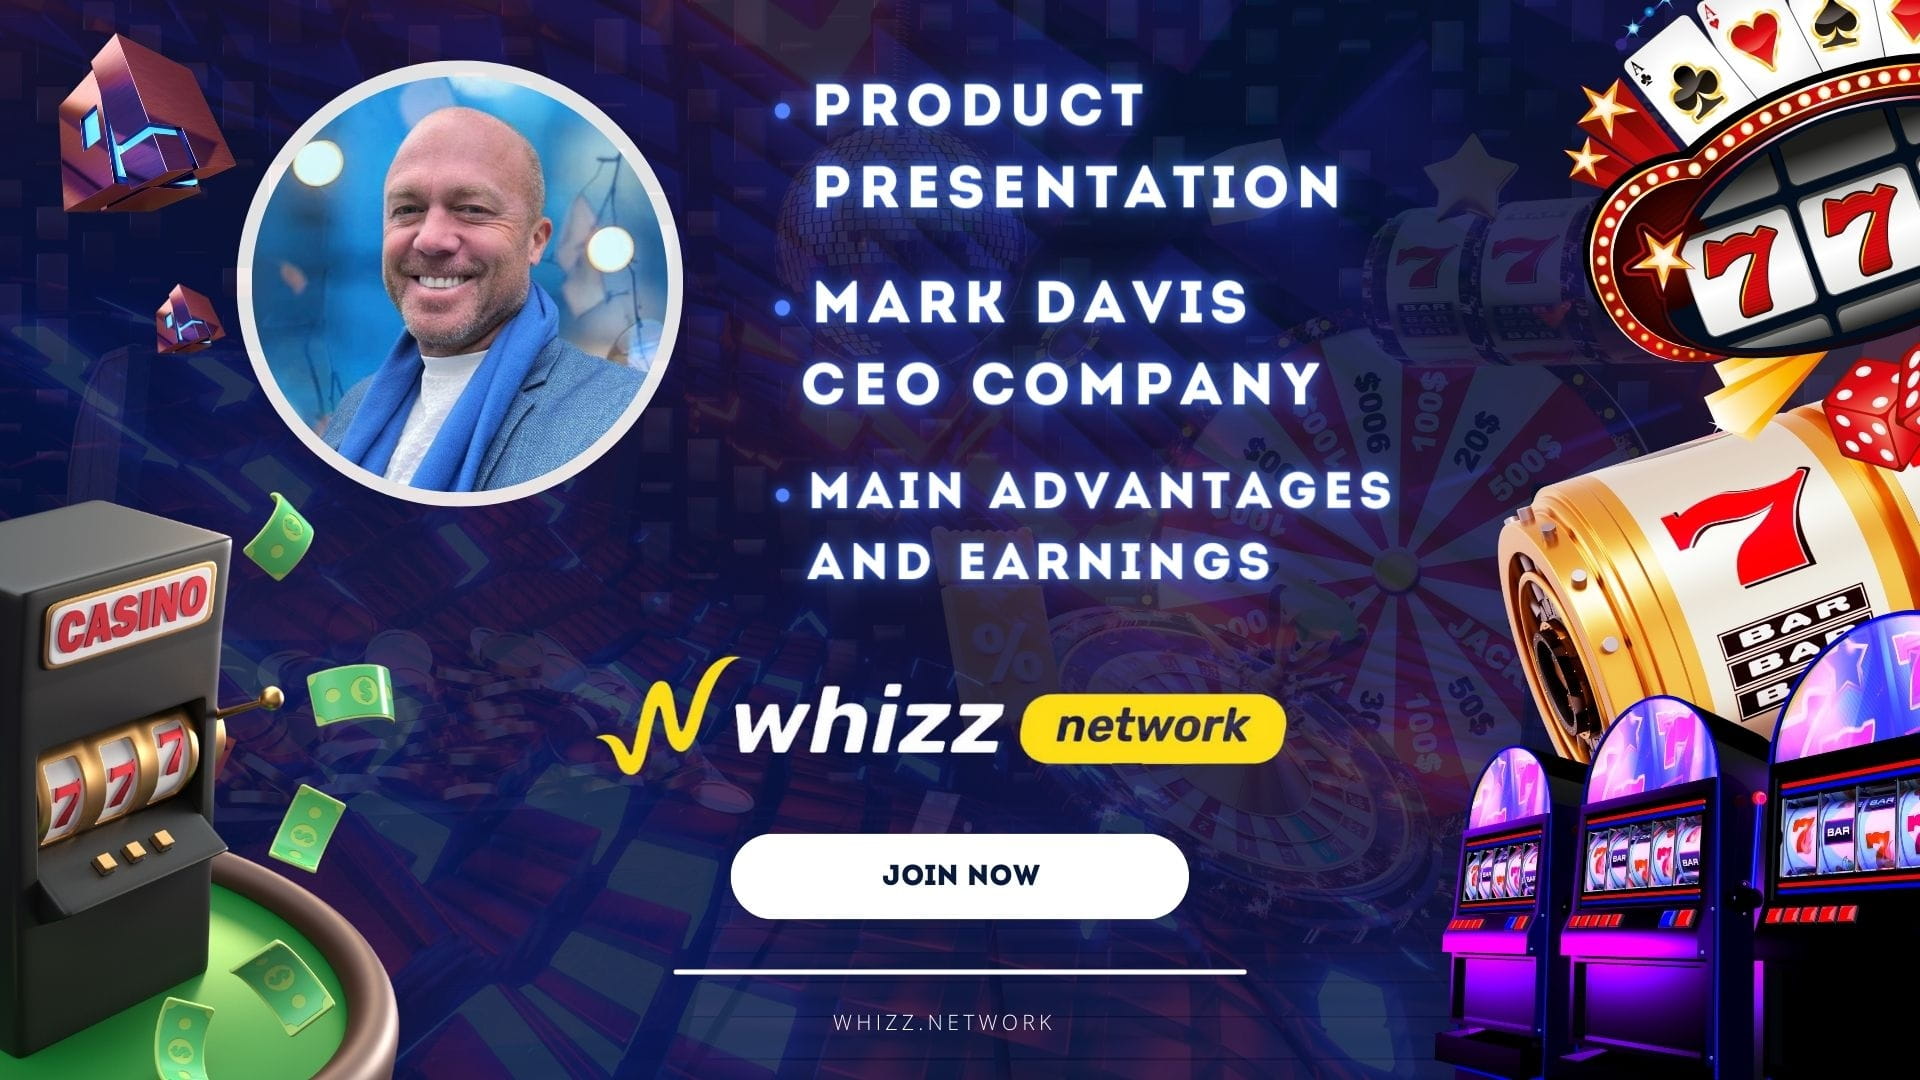 WHIZZ.NETWORK — A NEW MASTODON IN THE WORLD OF GAMBLING